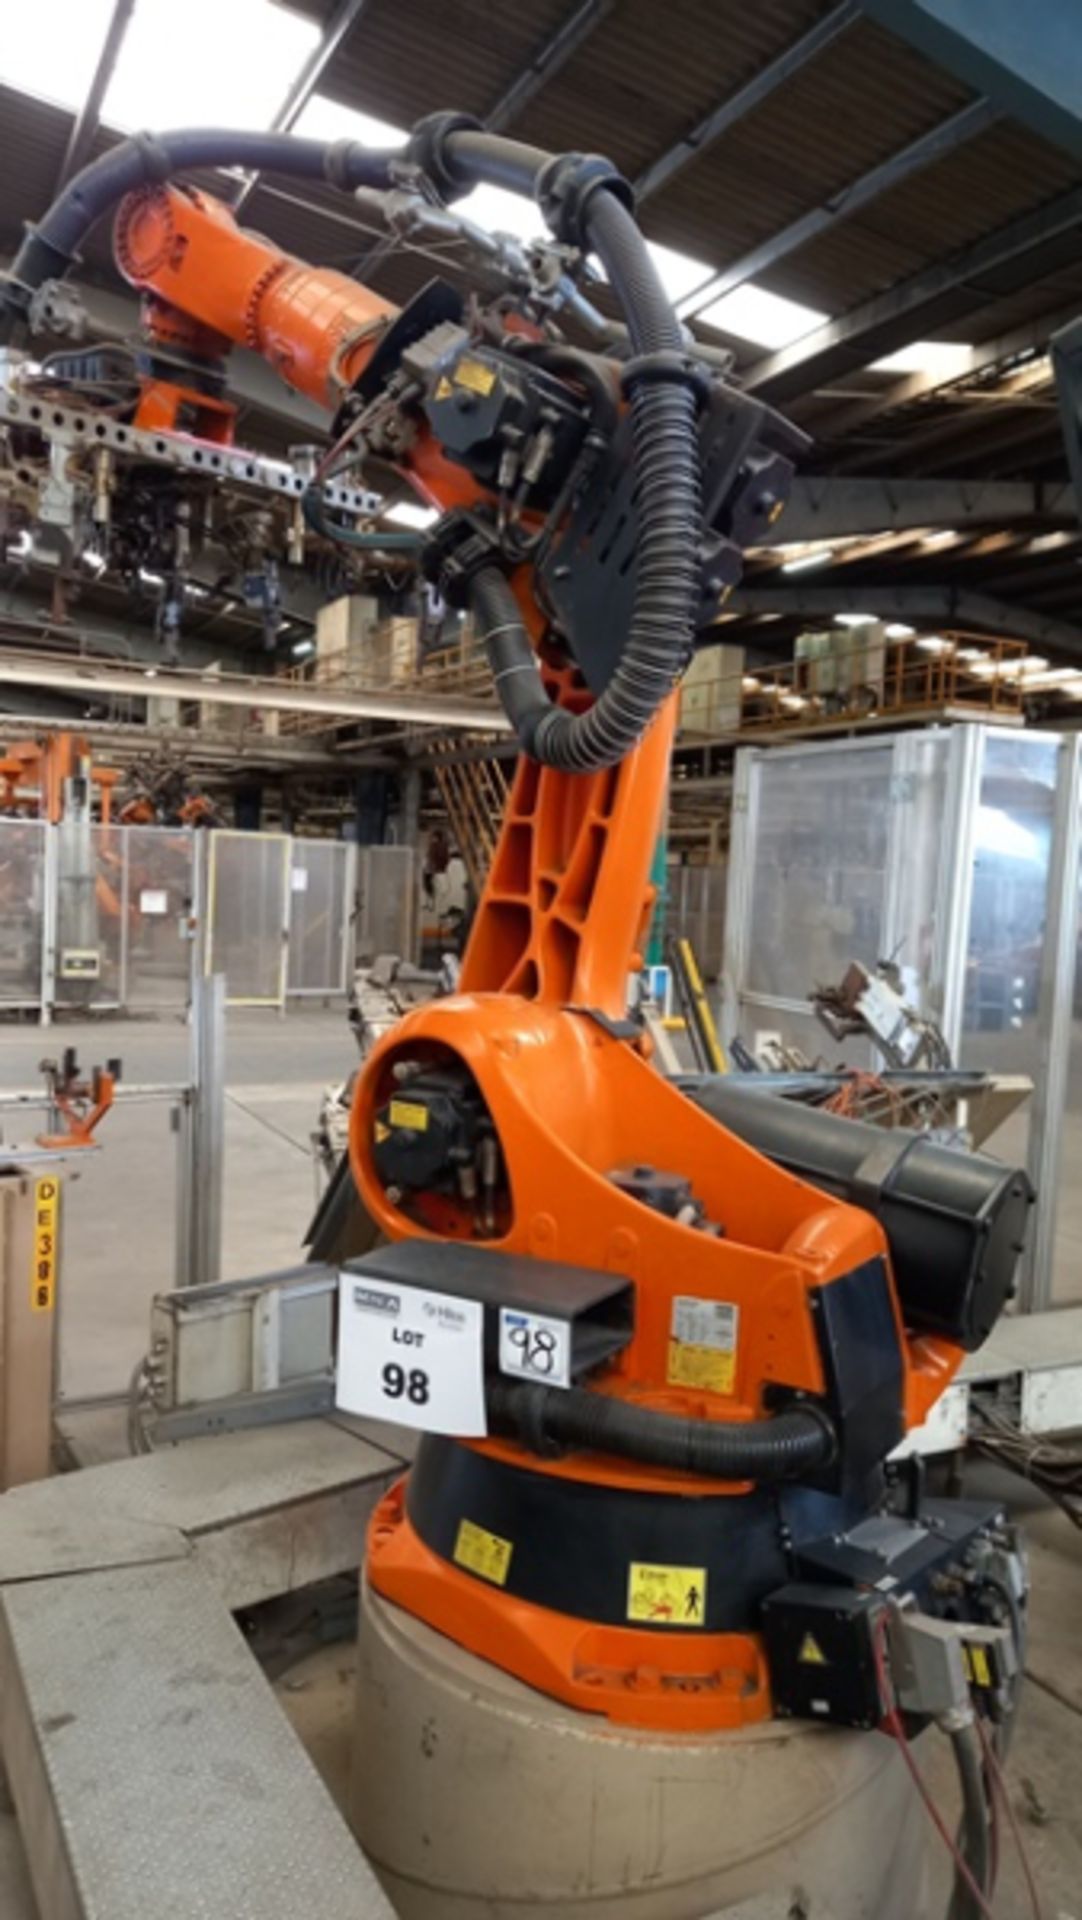 Kuka KR-180 Robot, Maximum Reach: 3,100 mm, Rated Payload: 180 Kg, with Robot Controller, New 2003